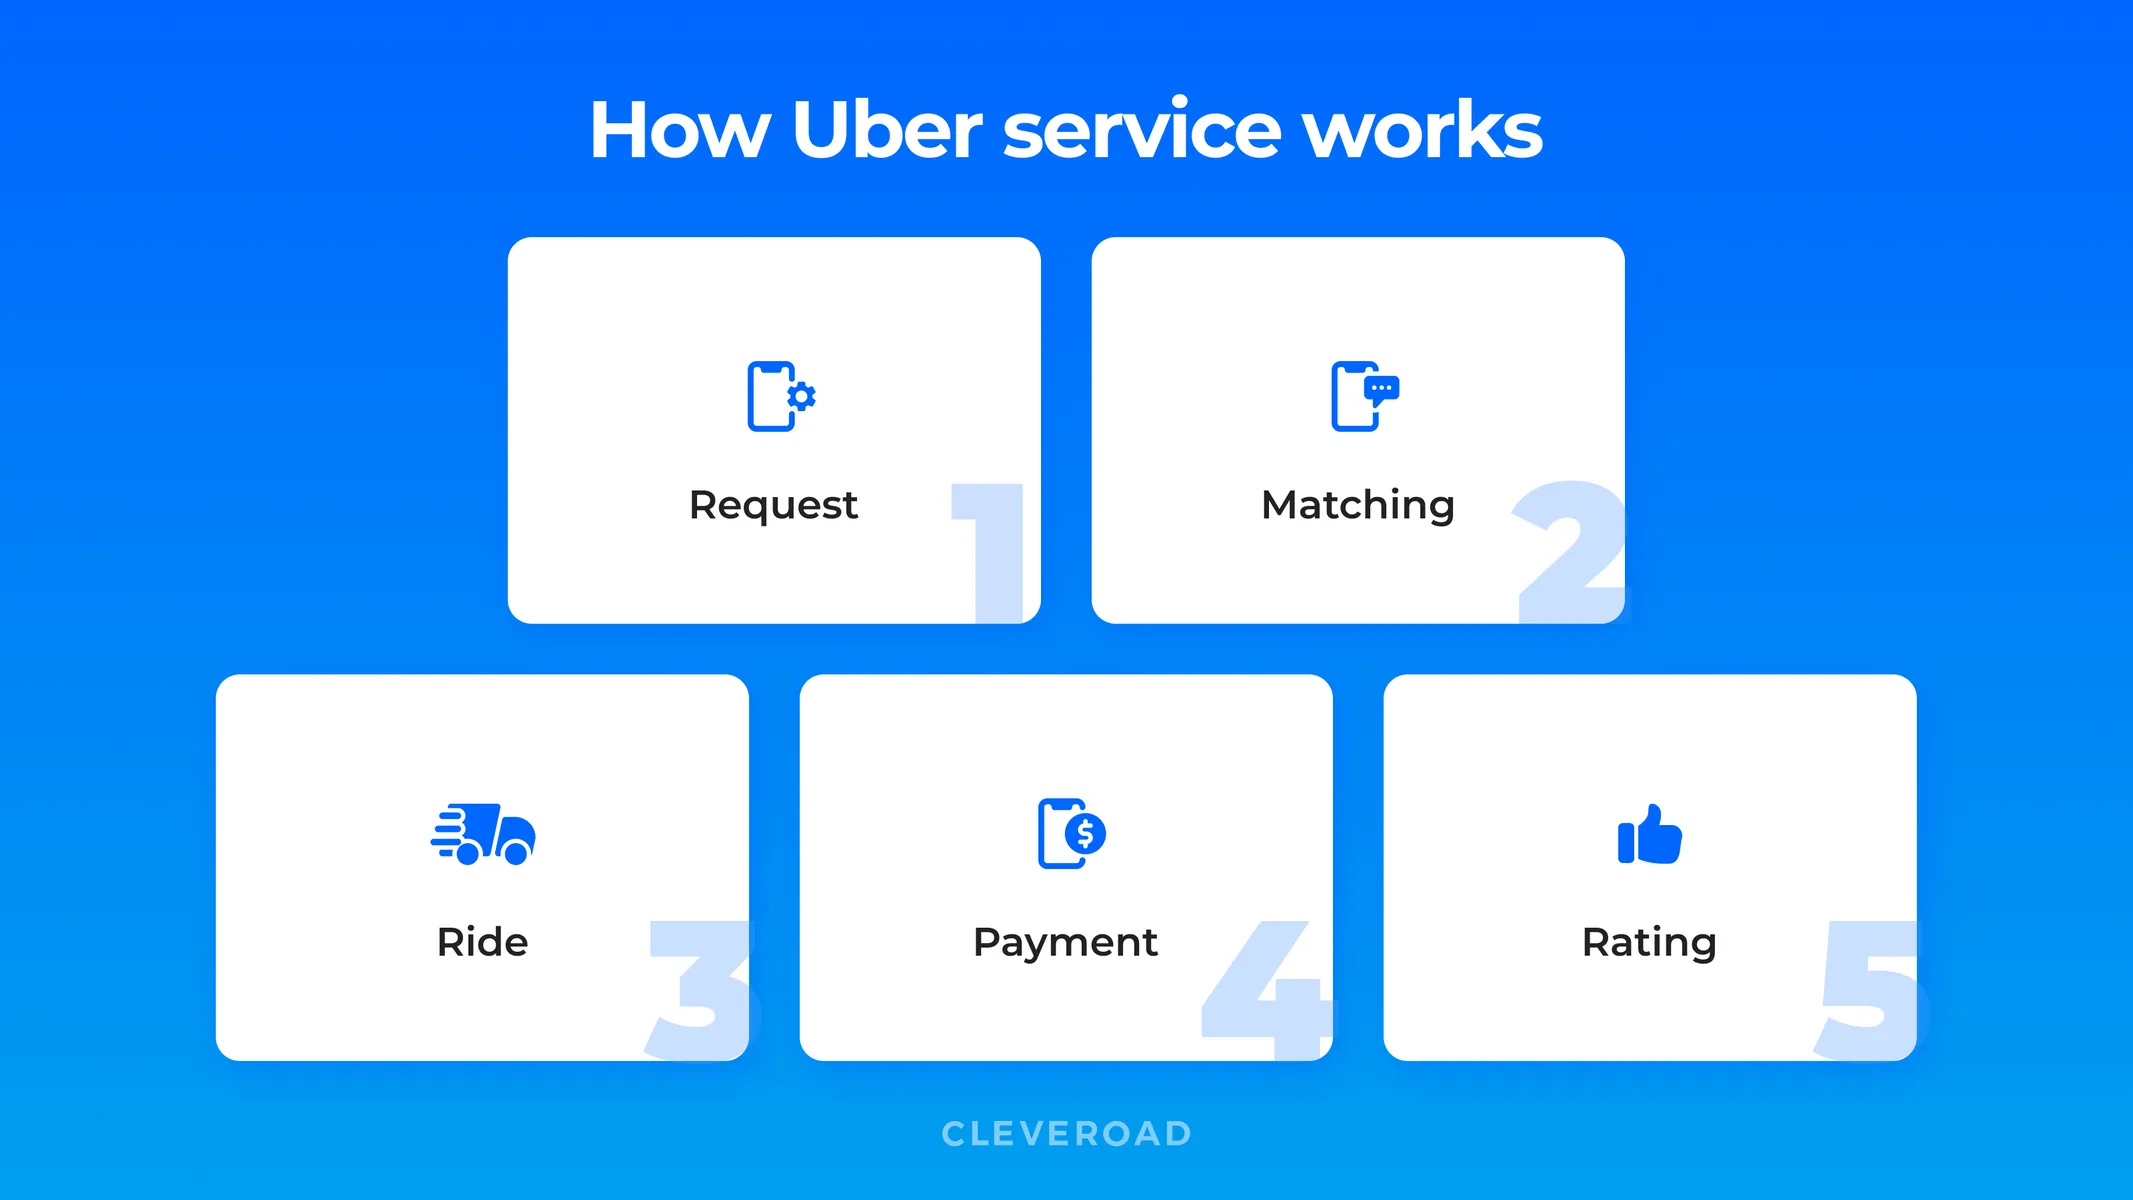 How Uber works from the user's side